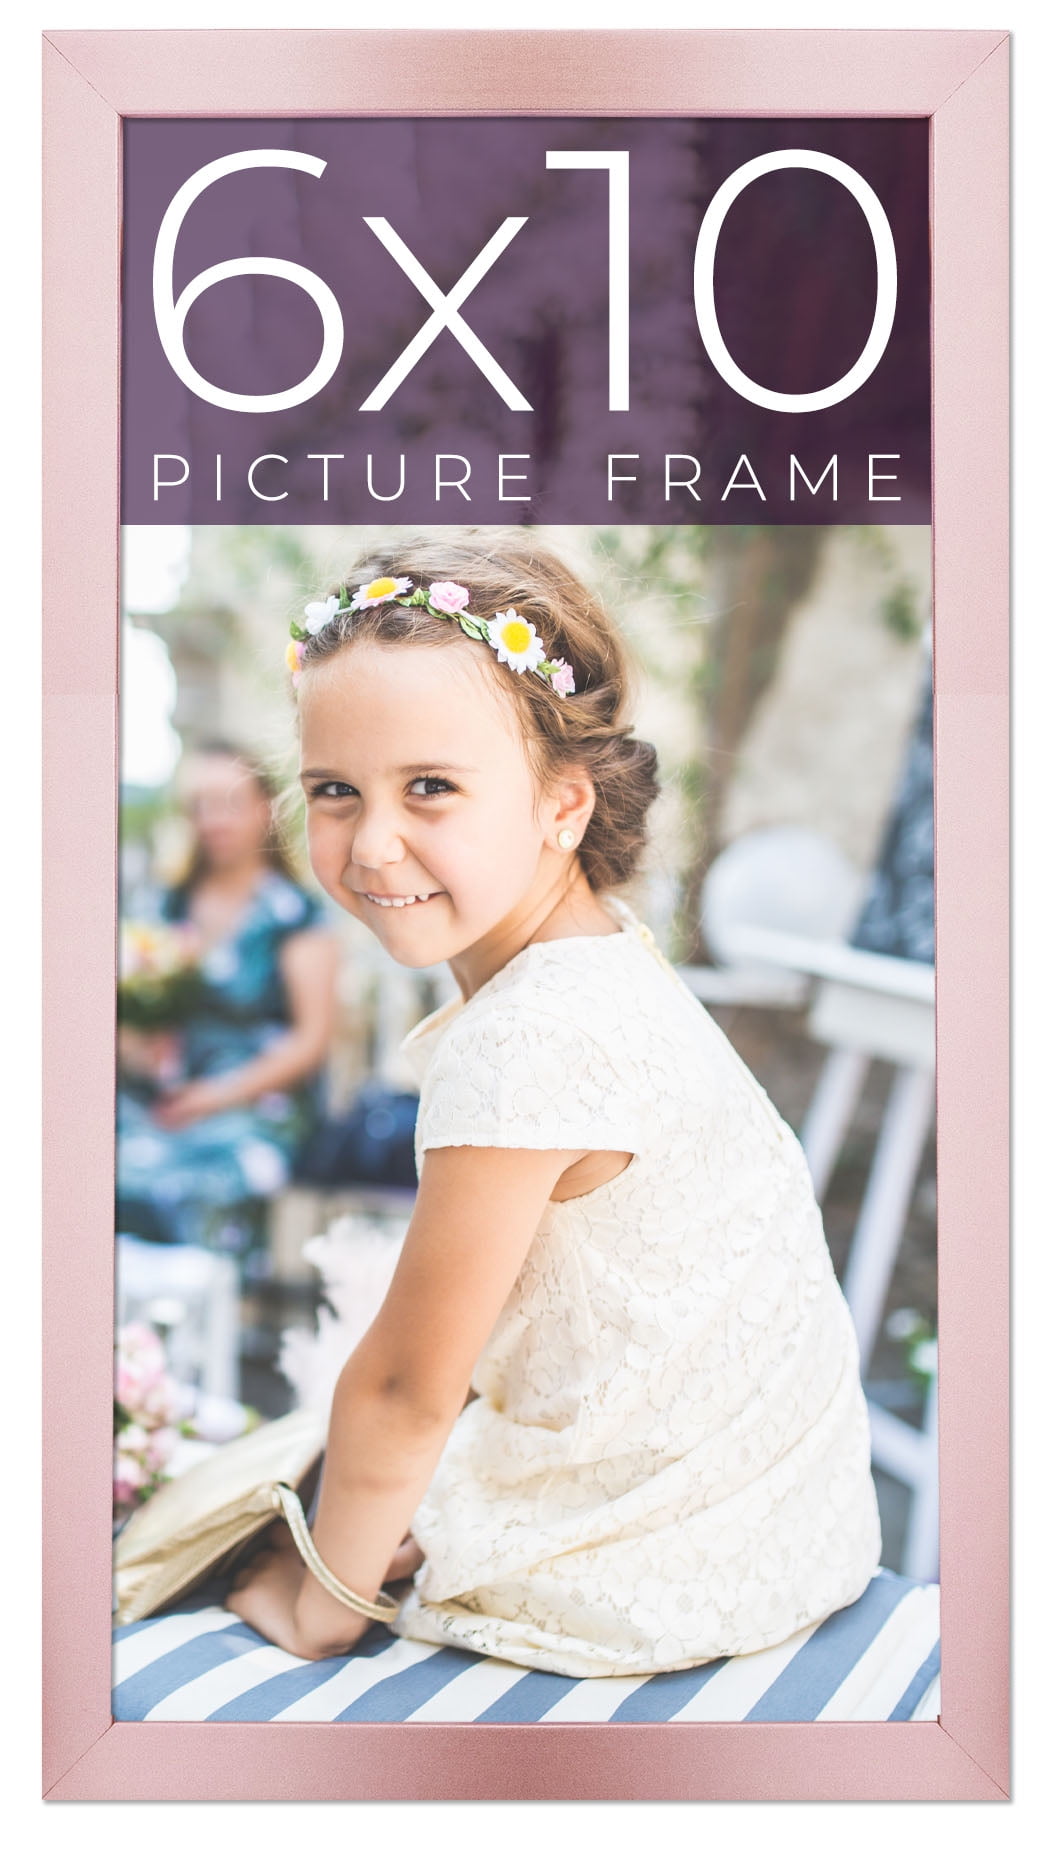 6x10 Picture Frame Brown 6x10 Poster 6 x 10 6by10 Photo